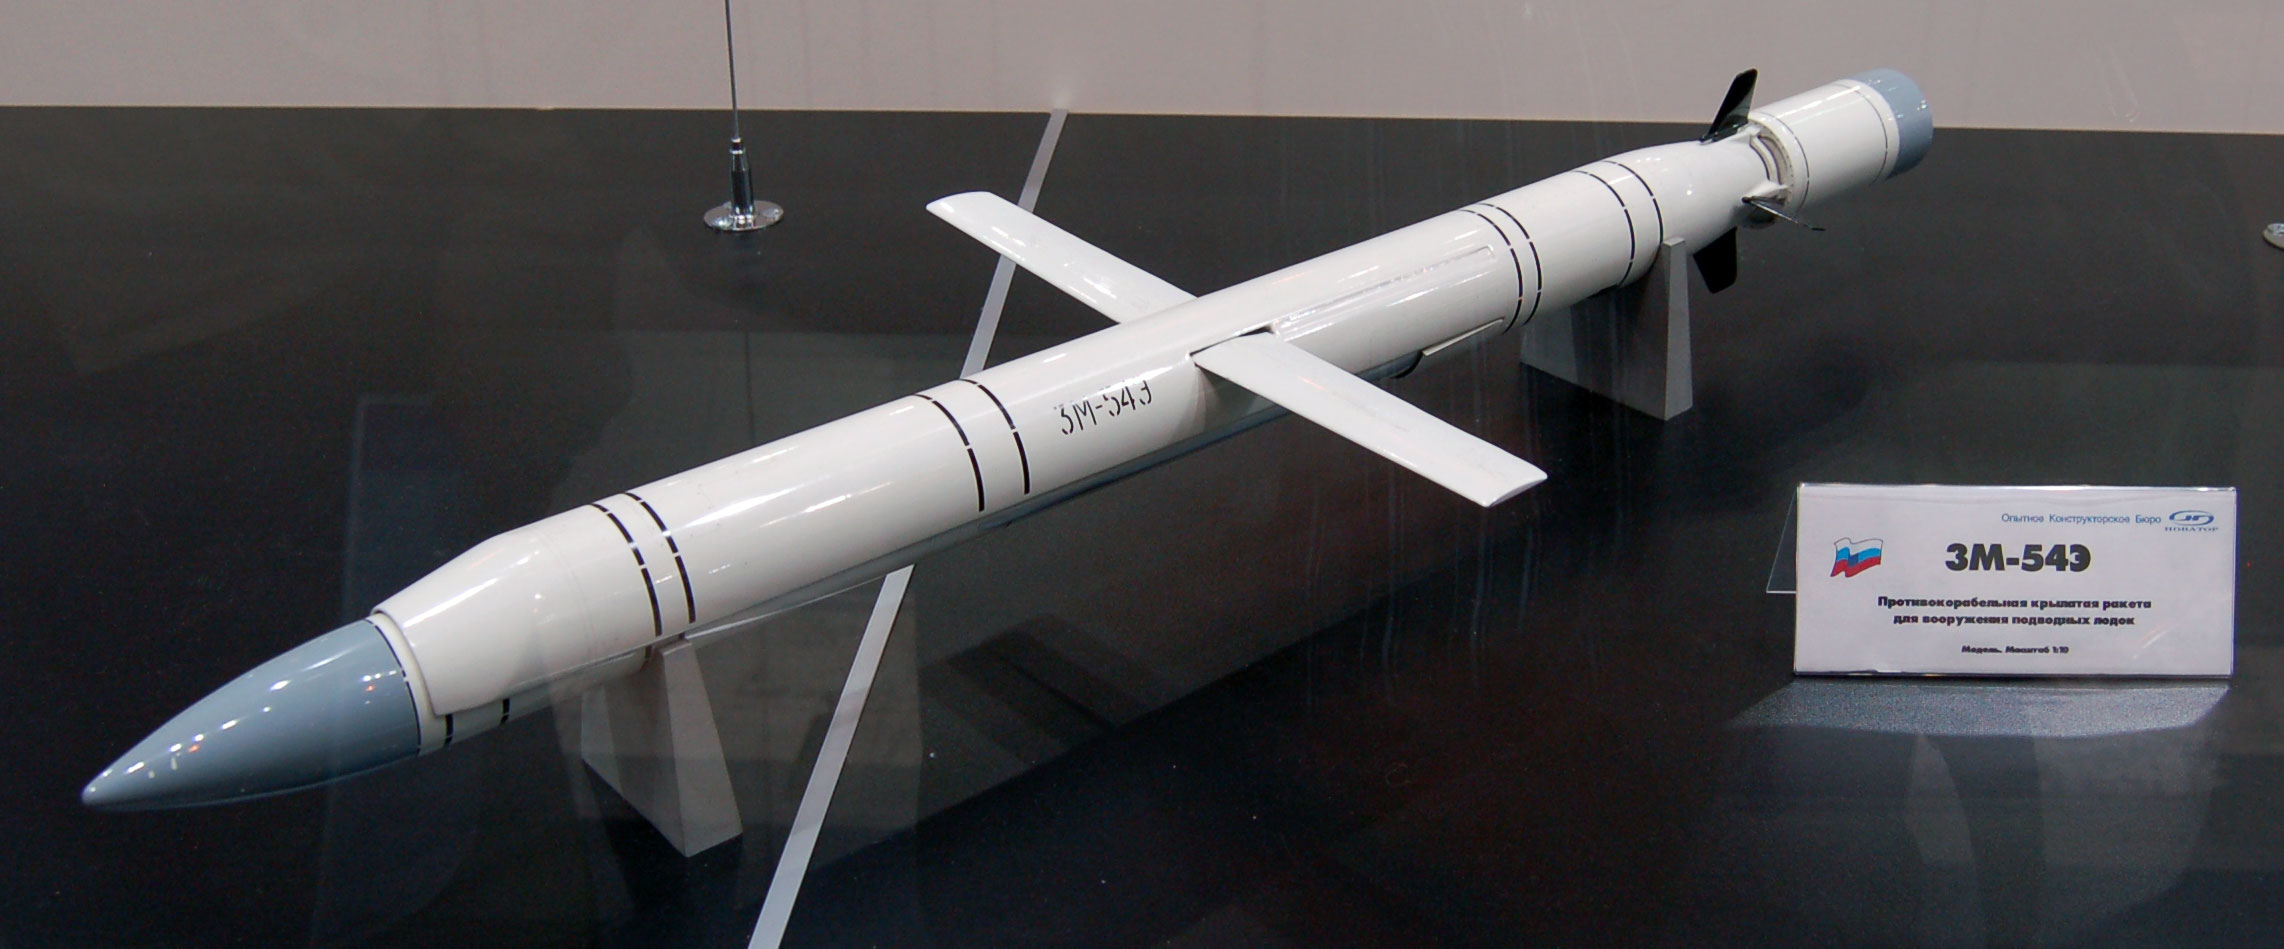 The 3M-54E anti-ship and land-attack cruise missile.